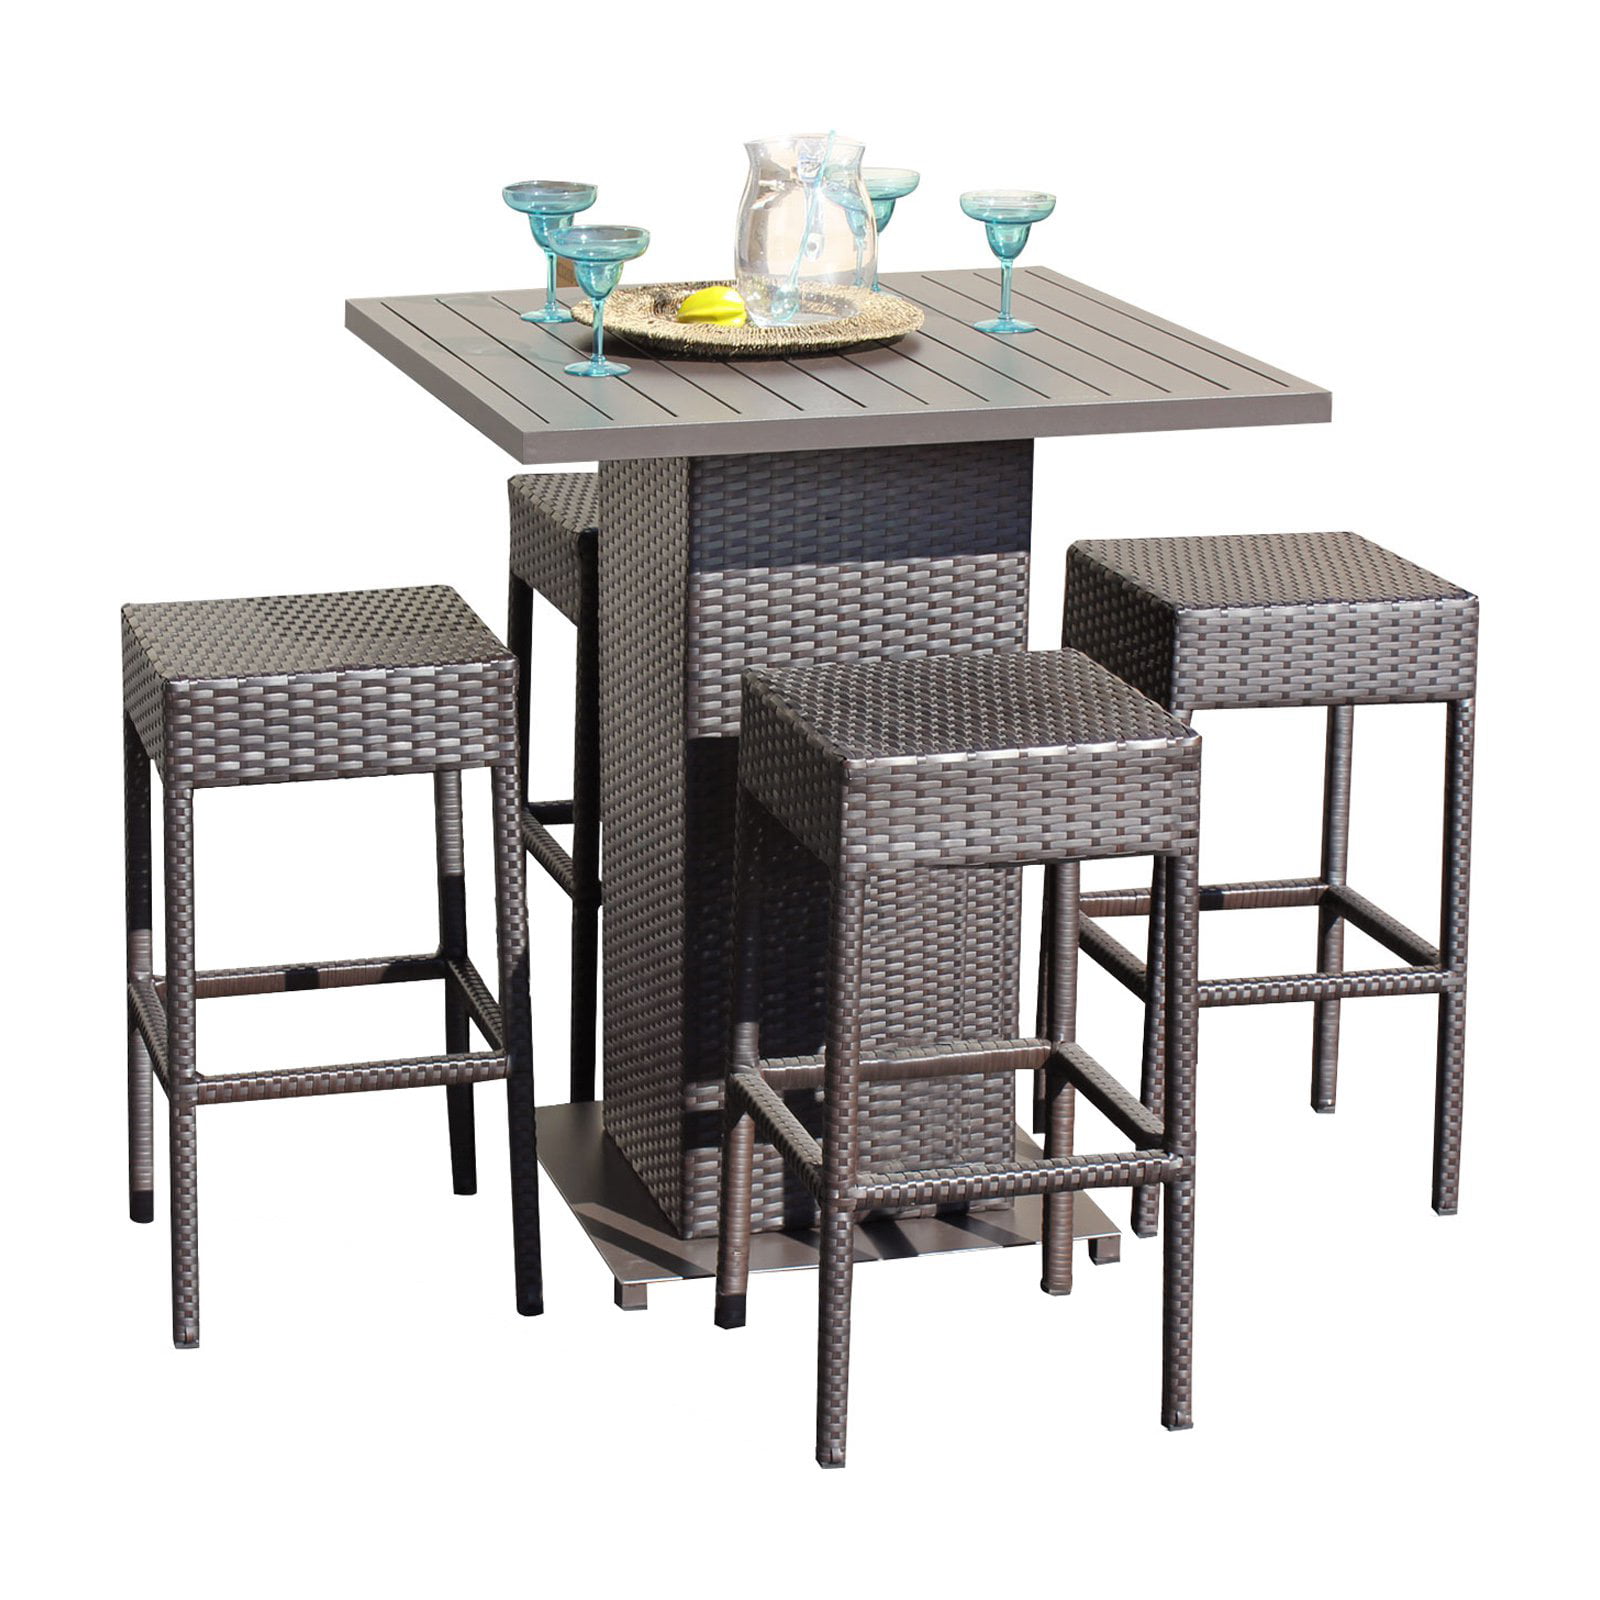 Espresso TK Classics WITHBACK-4 Barbados Pub Table Set with Barstools 5 Piece Outdoor Wicker Patio Bar Furniture 